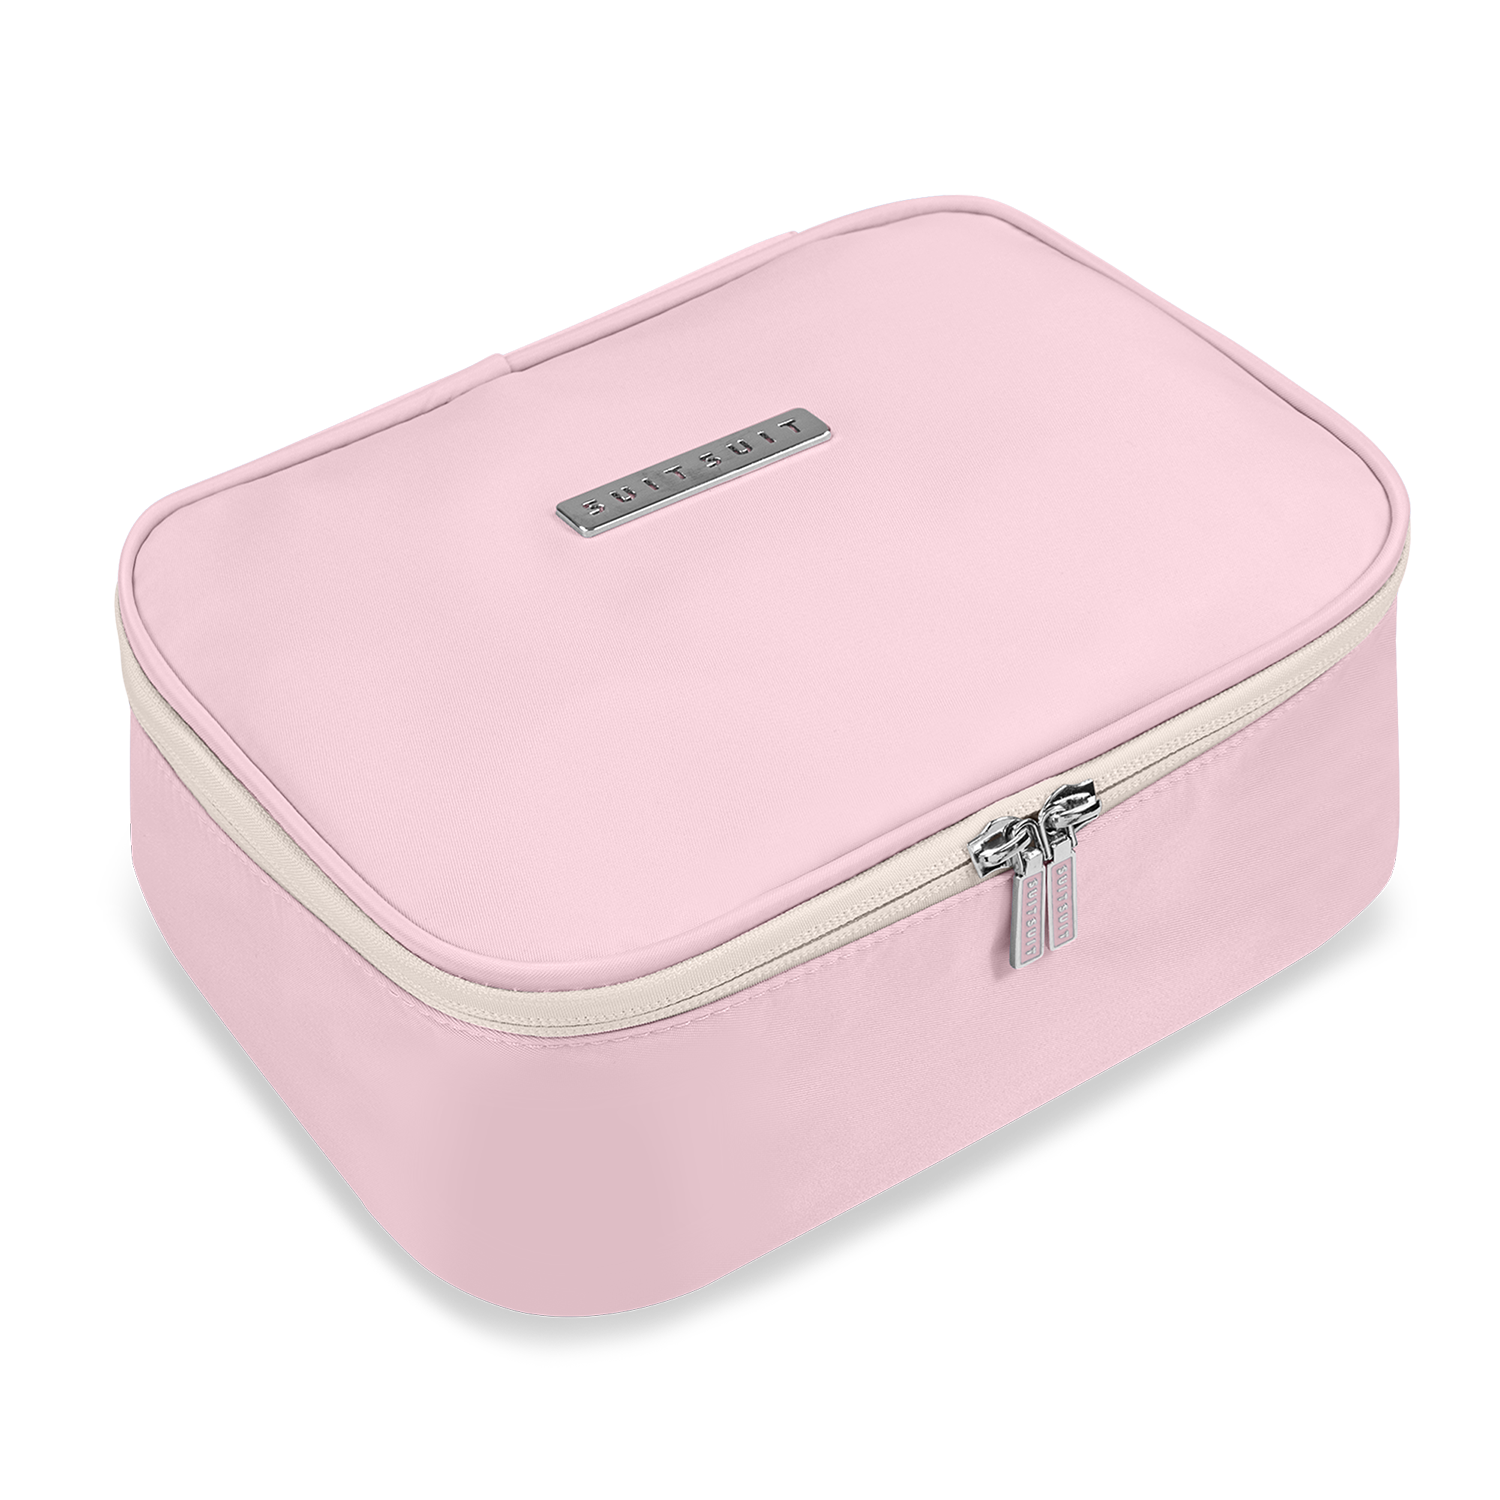 Fabulous Fifties - Pink Dust - Packing Cube Set (28 inch)